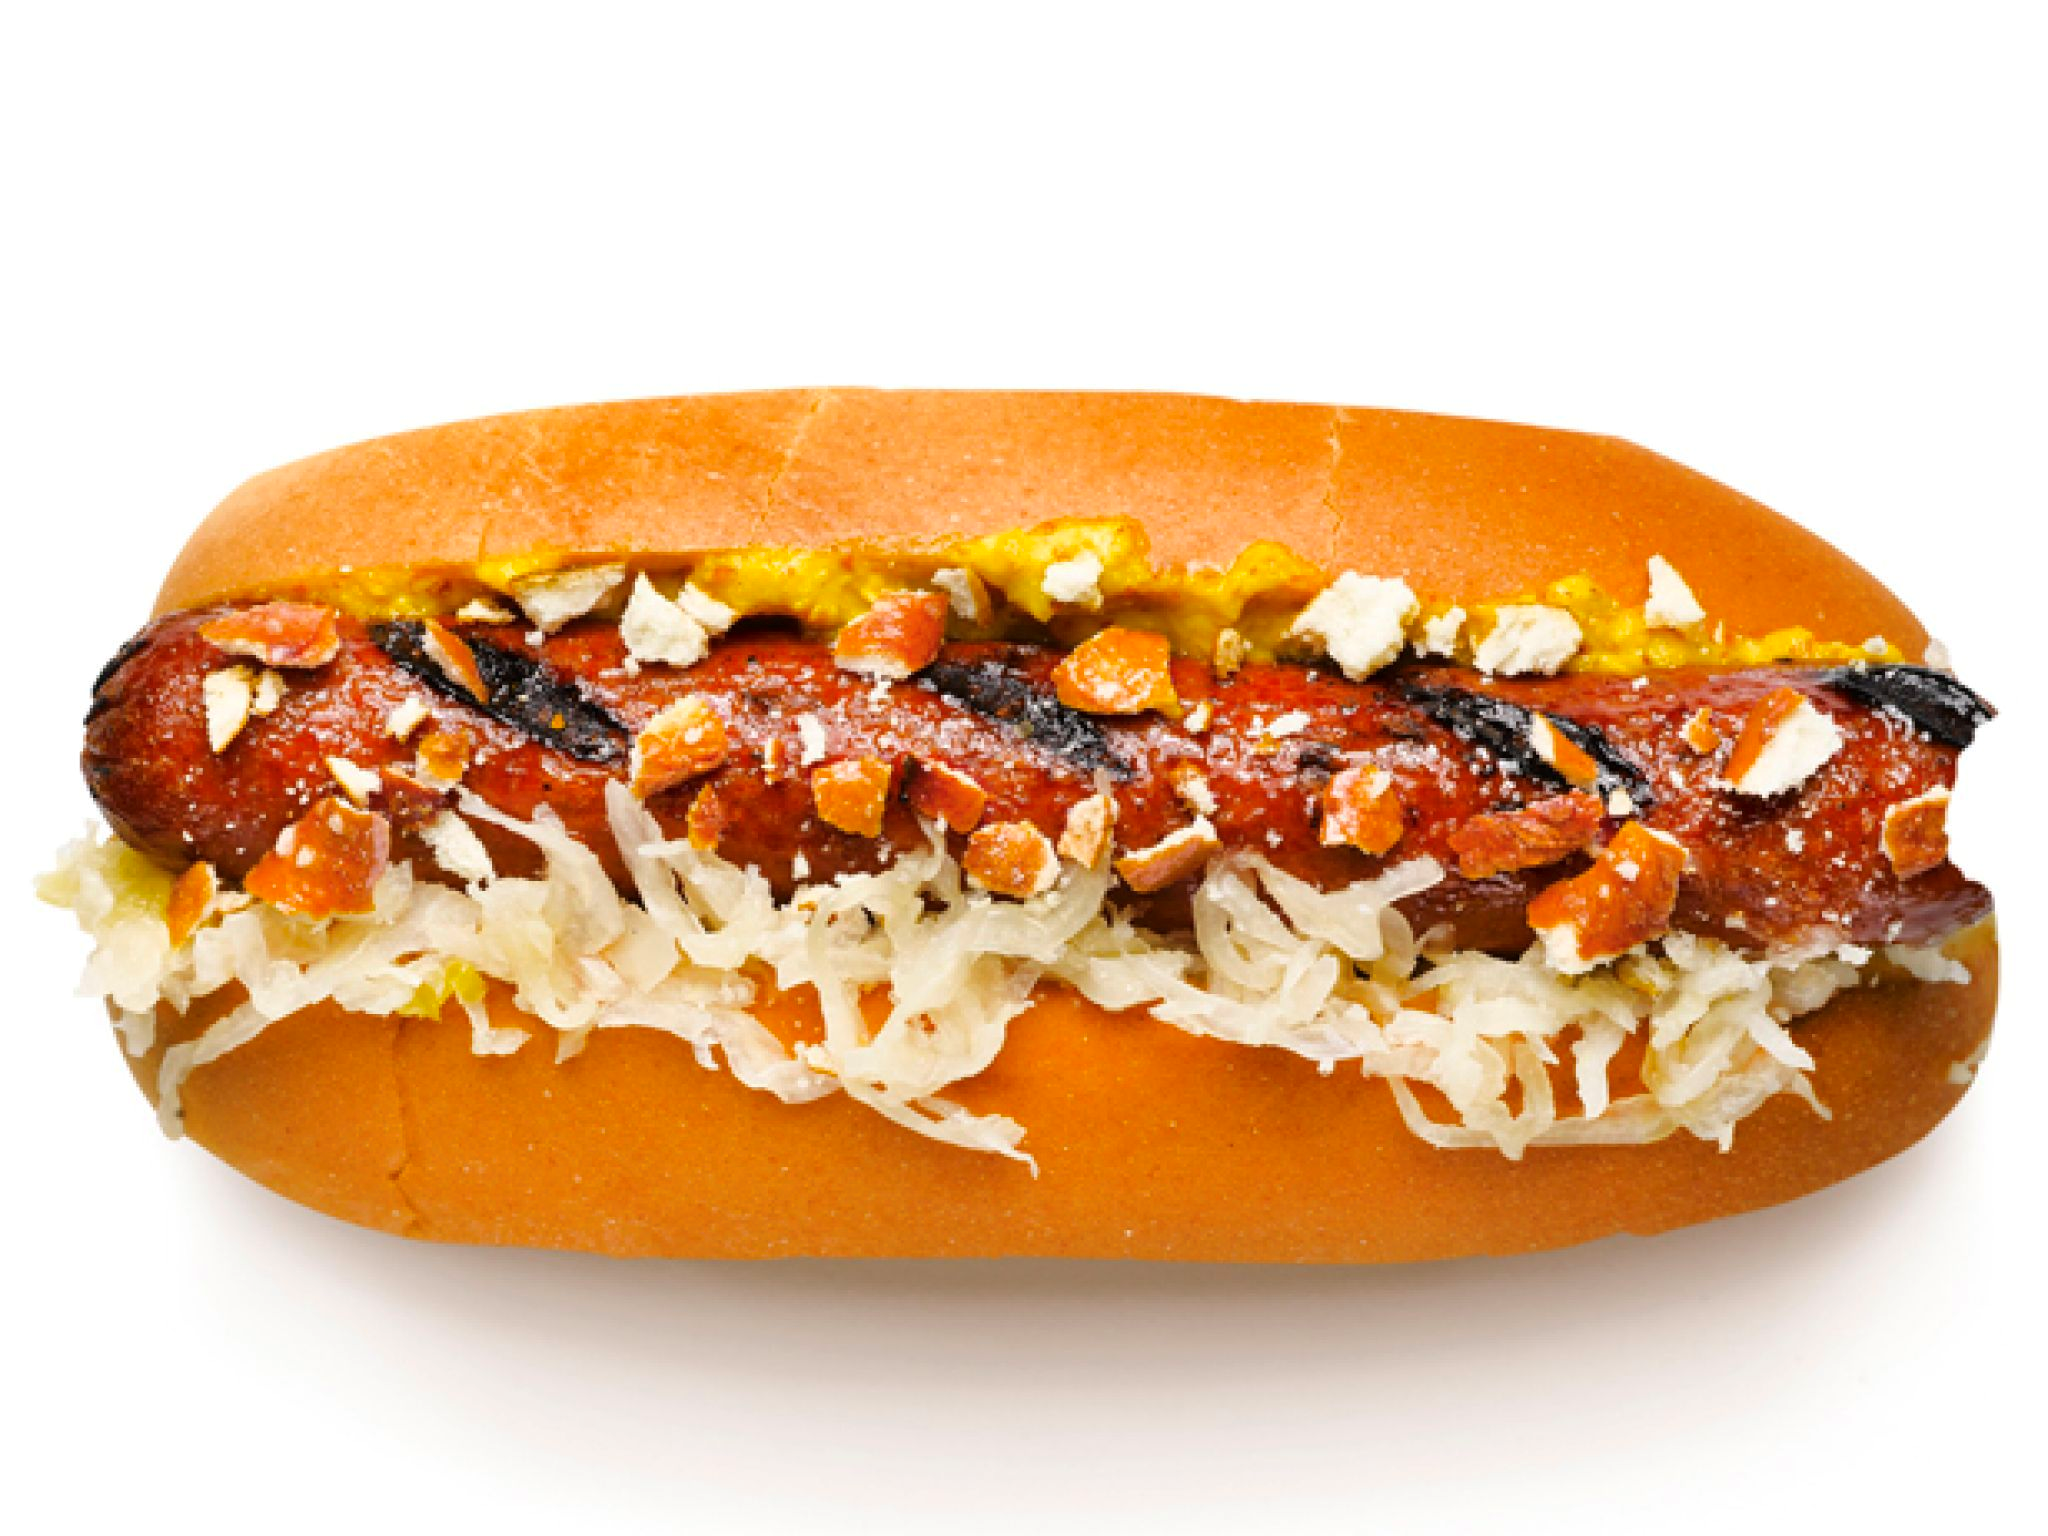 Hotdog sandwich with toppings